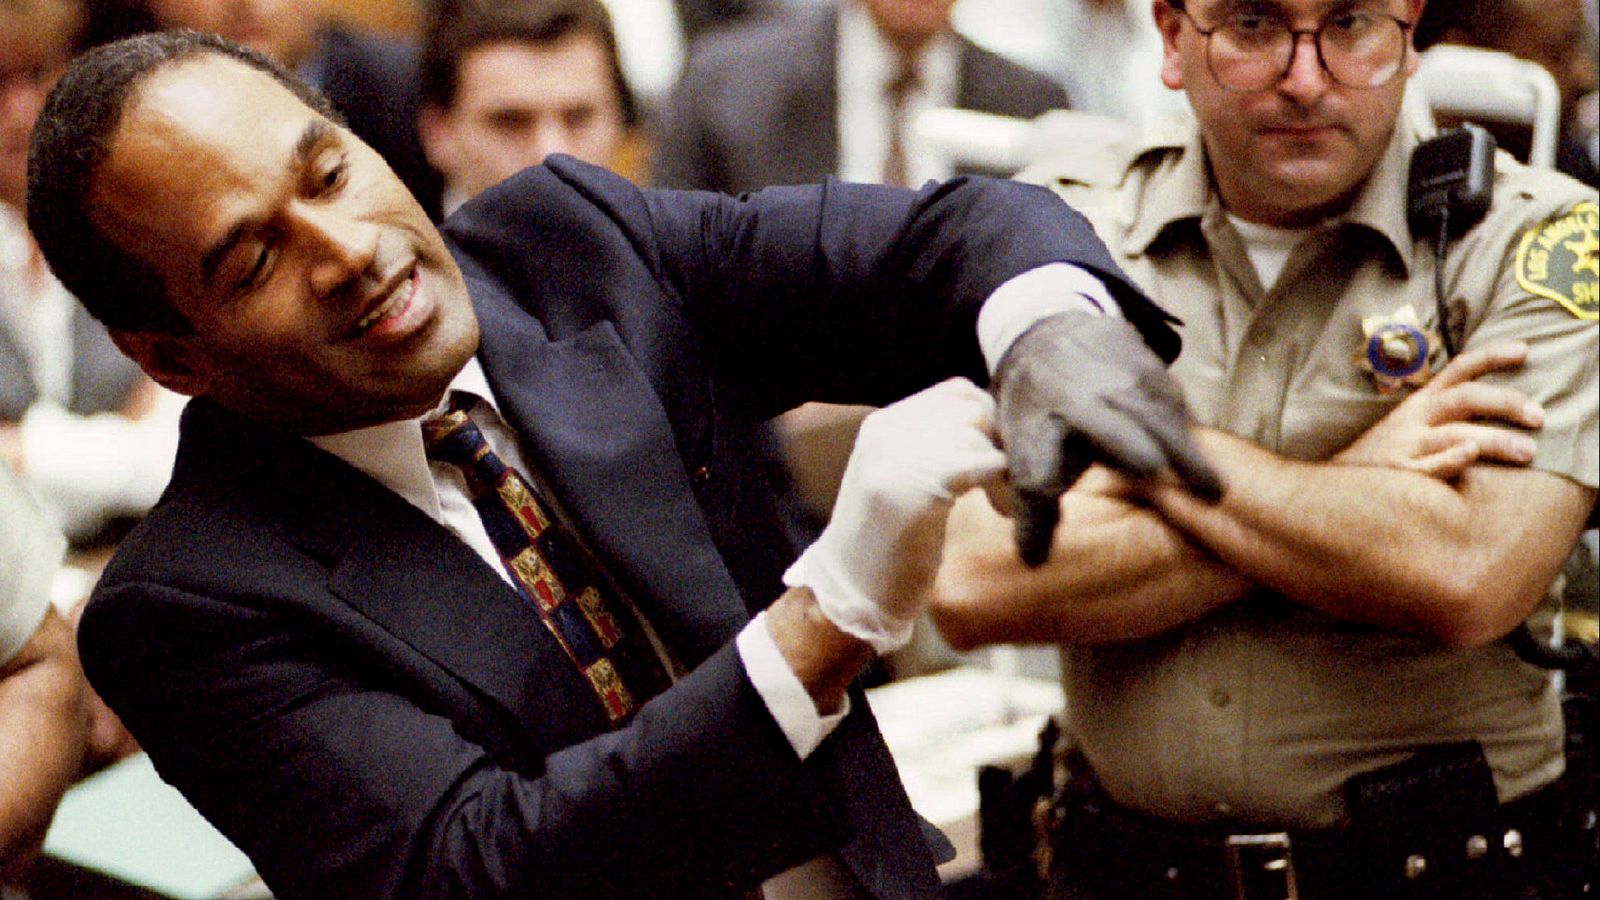 OJ Simpson murder trial: How the dramatic court case unfolded